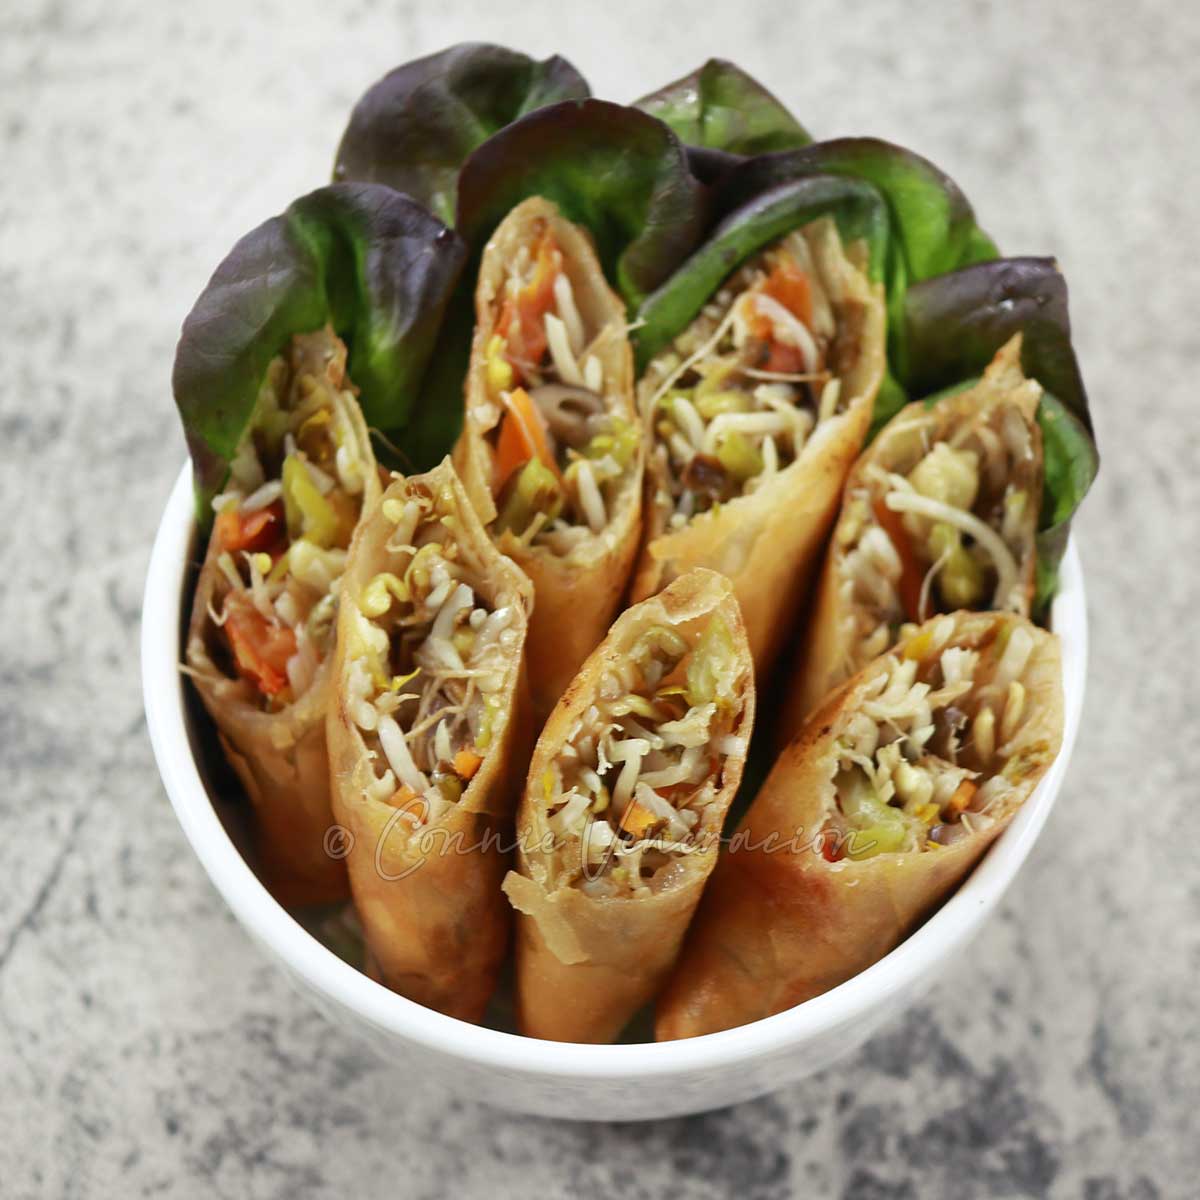 Bean sprouts spring rolls (lumpiang togue)